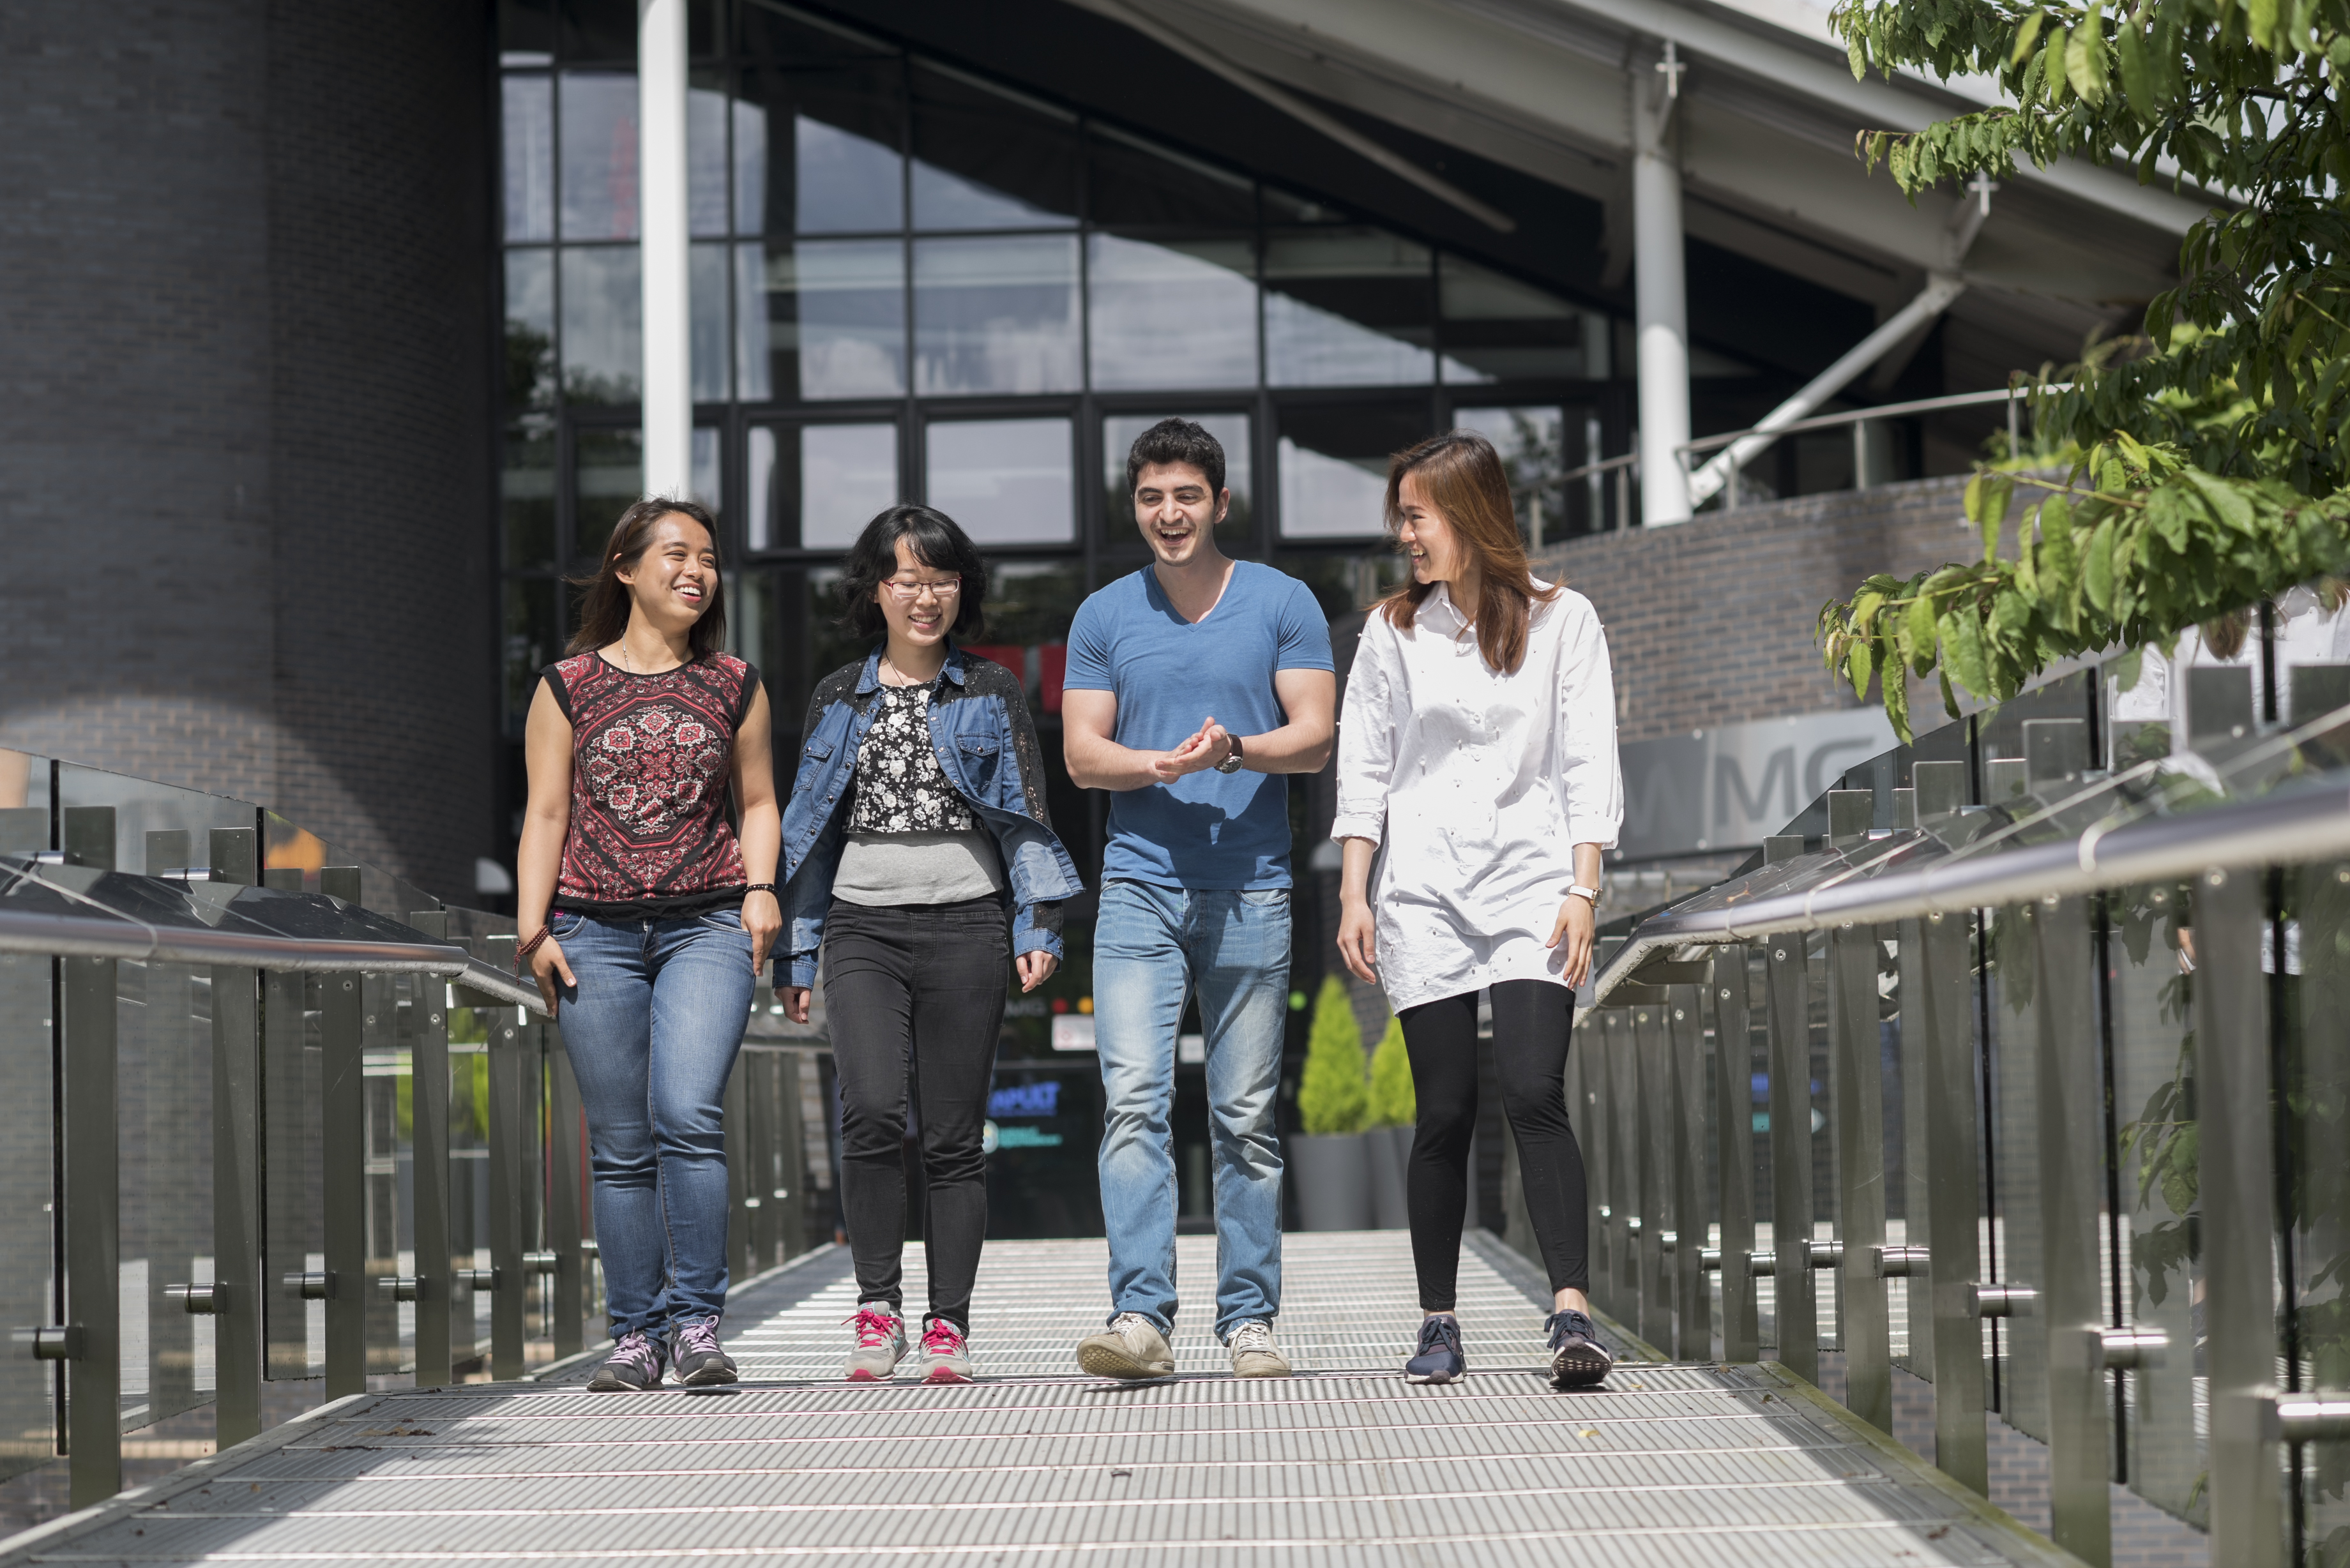 A group of WMG students cross the bridge outside a WMG building